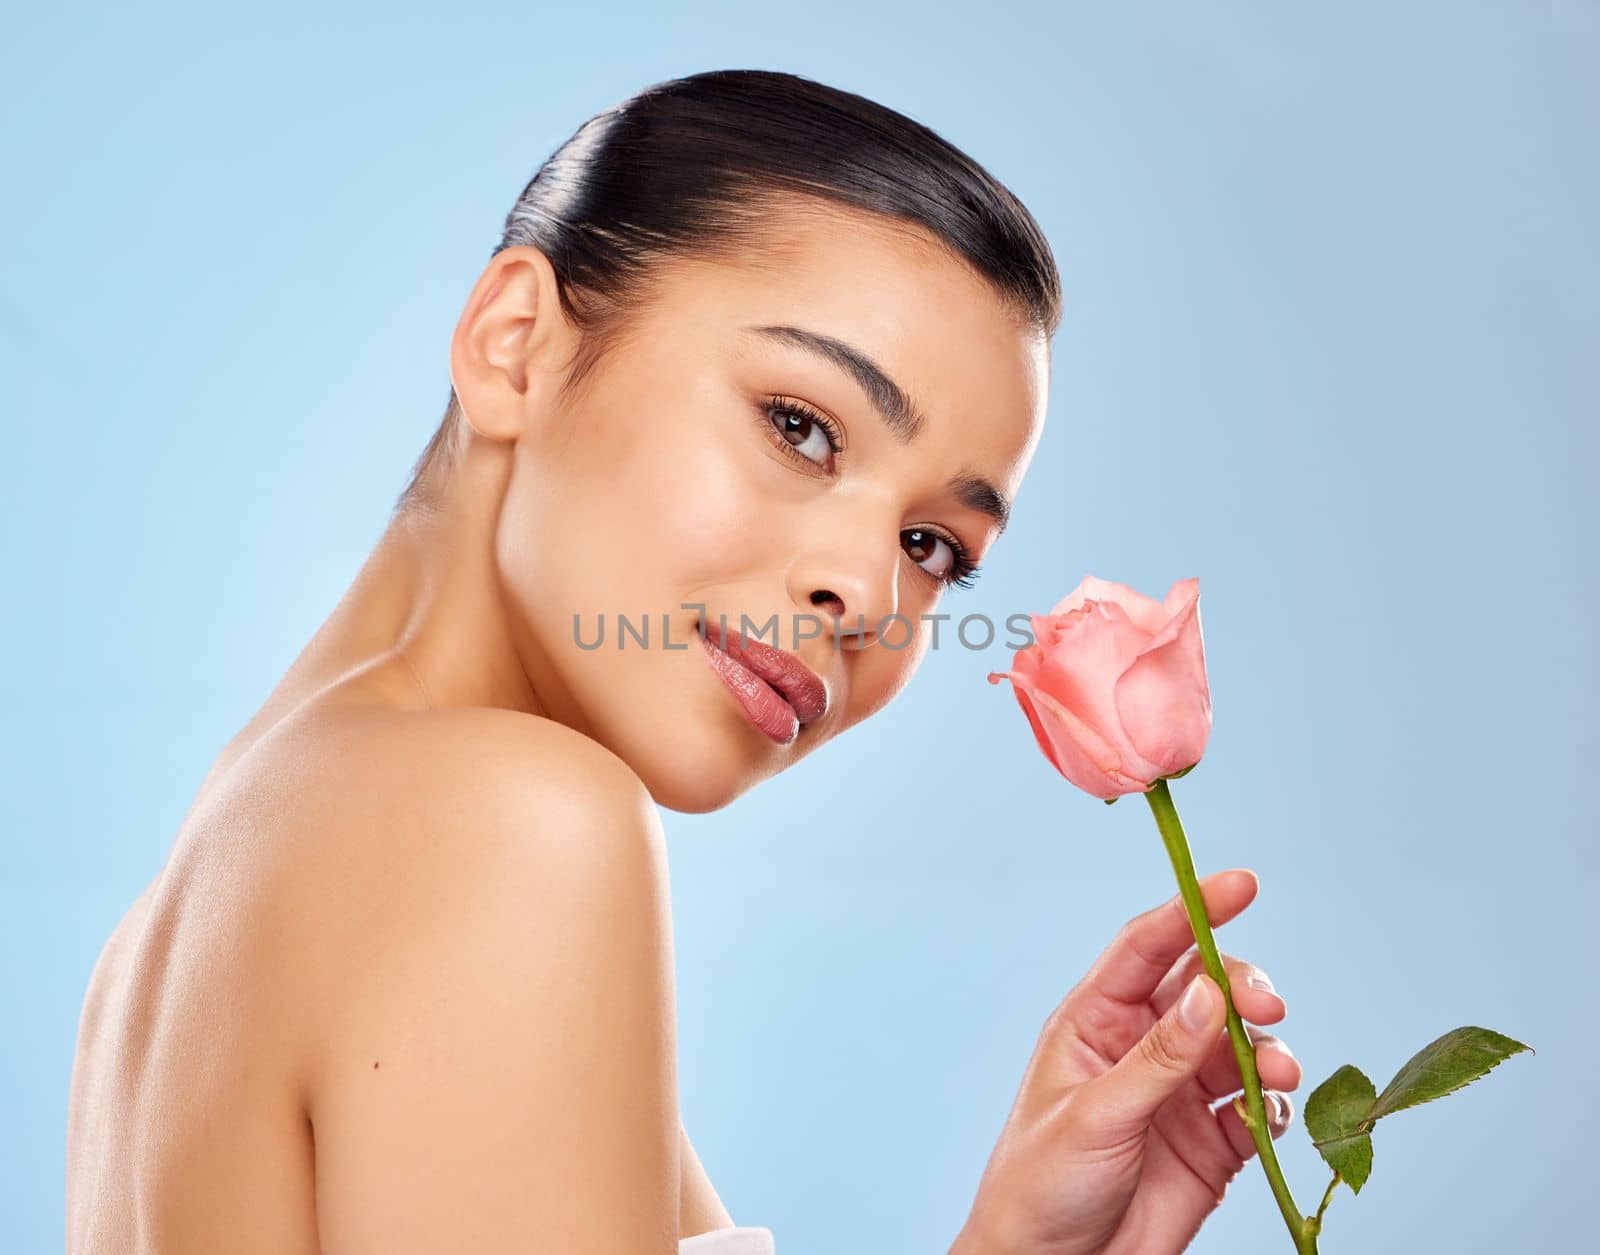 Her natural beauty blooms like no other. Studio portrait of an attractive young woman posing with a pink rose against a blue background. by YuriArcurs